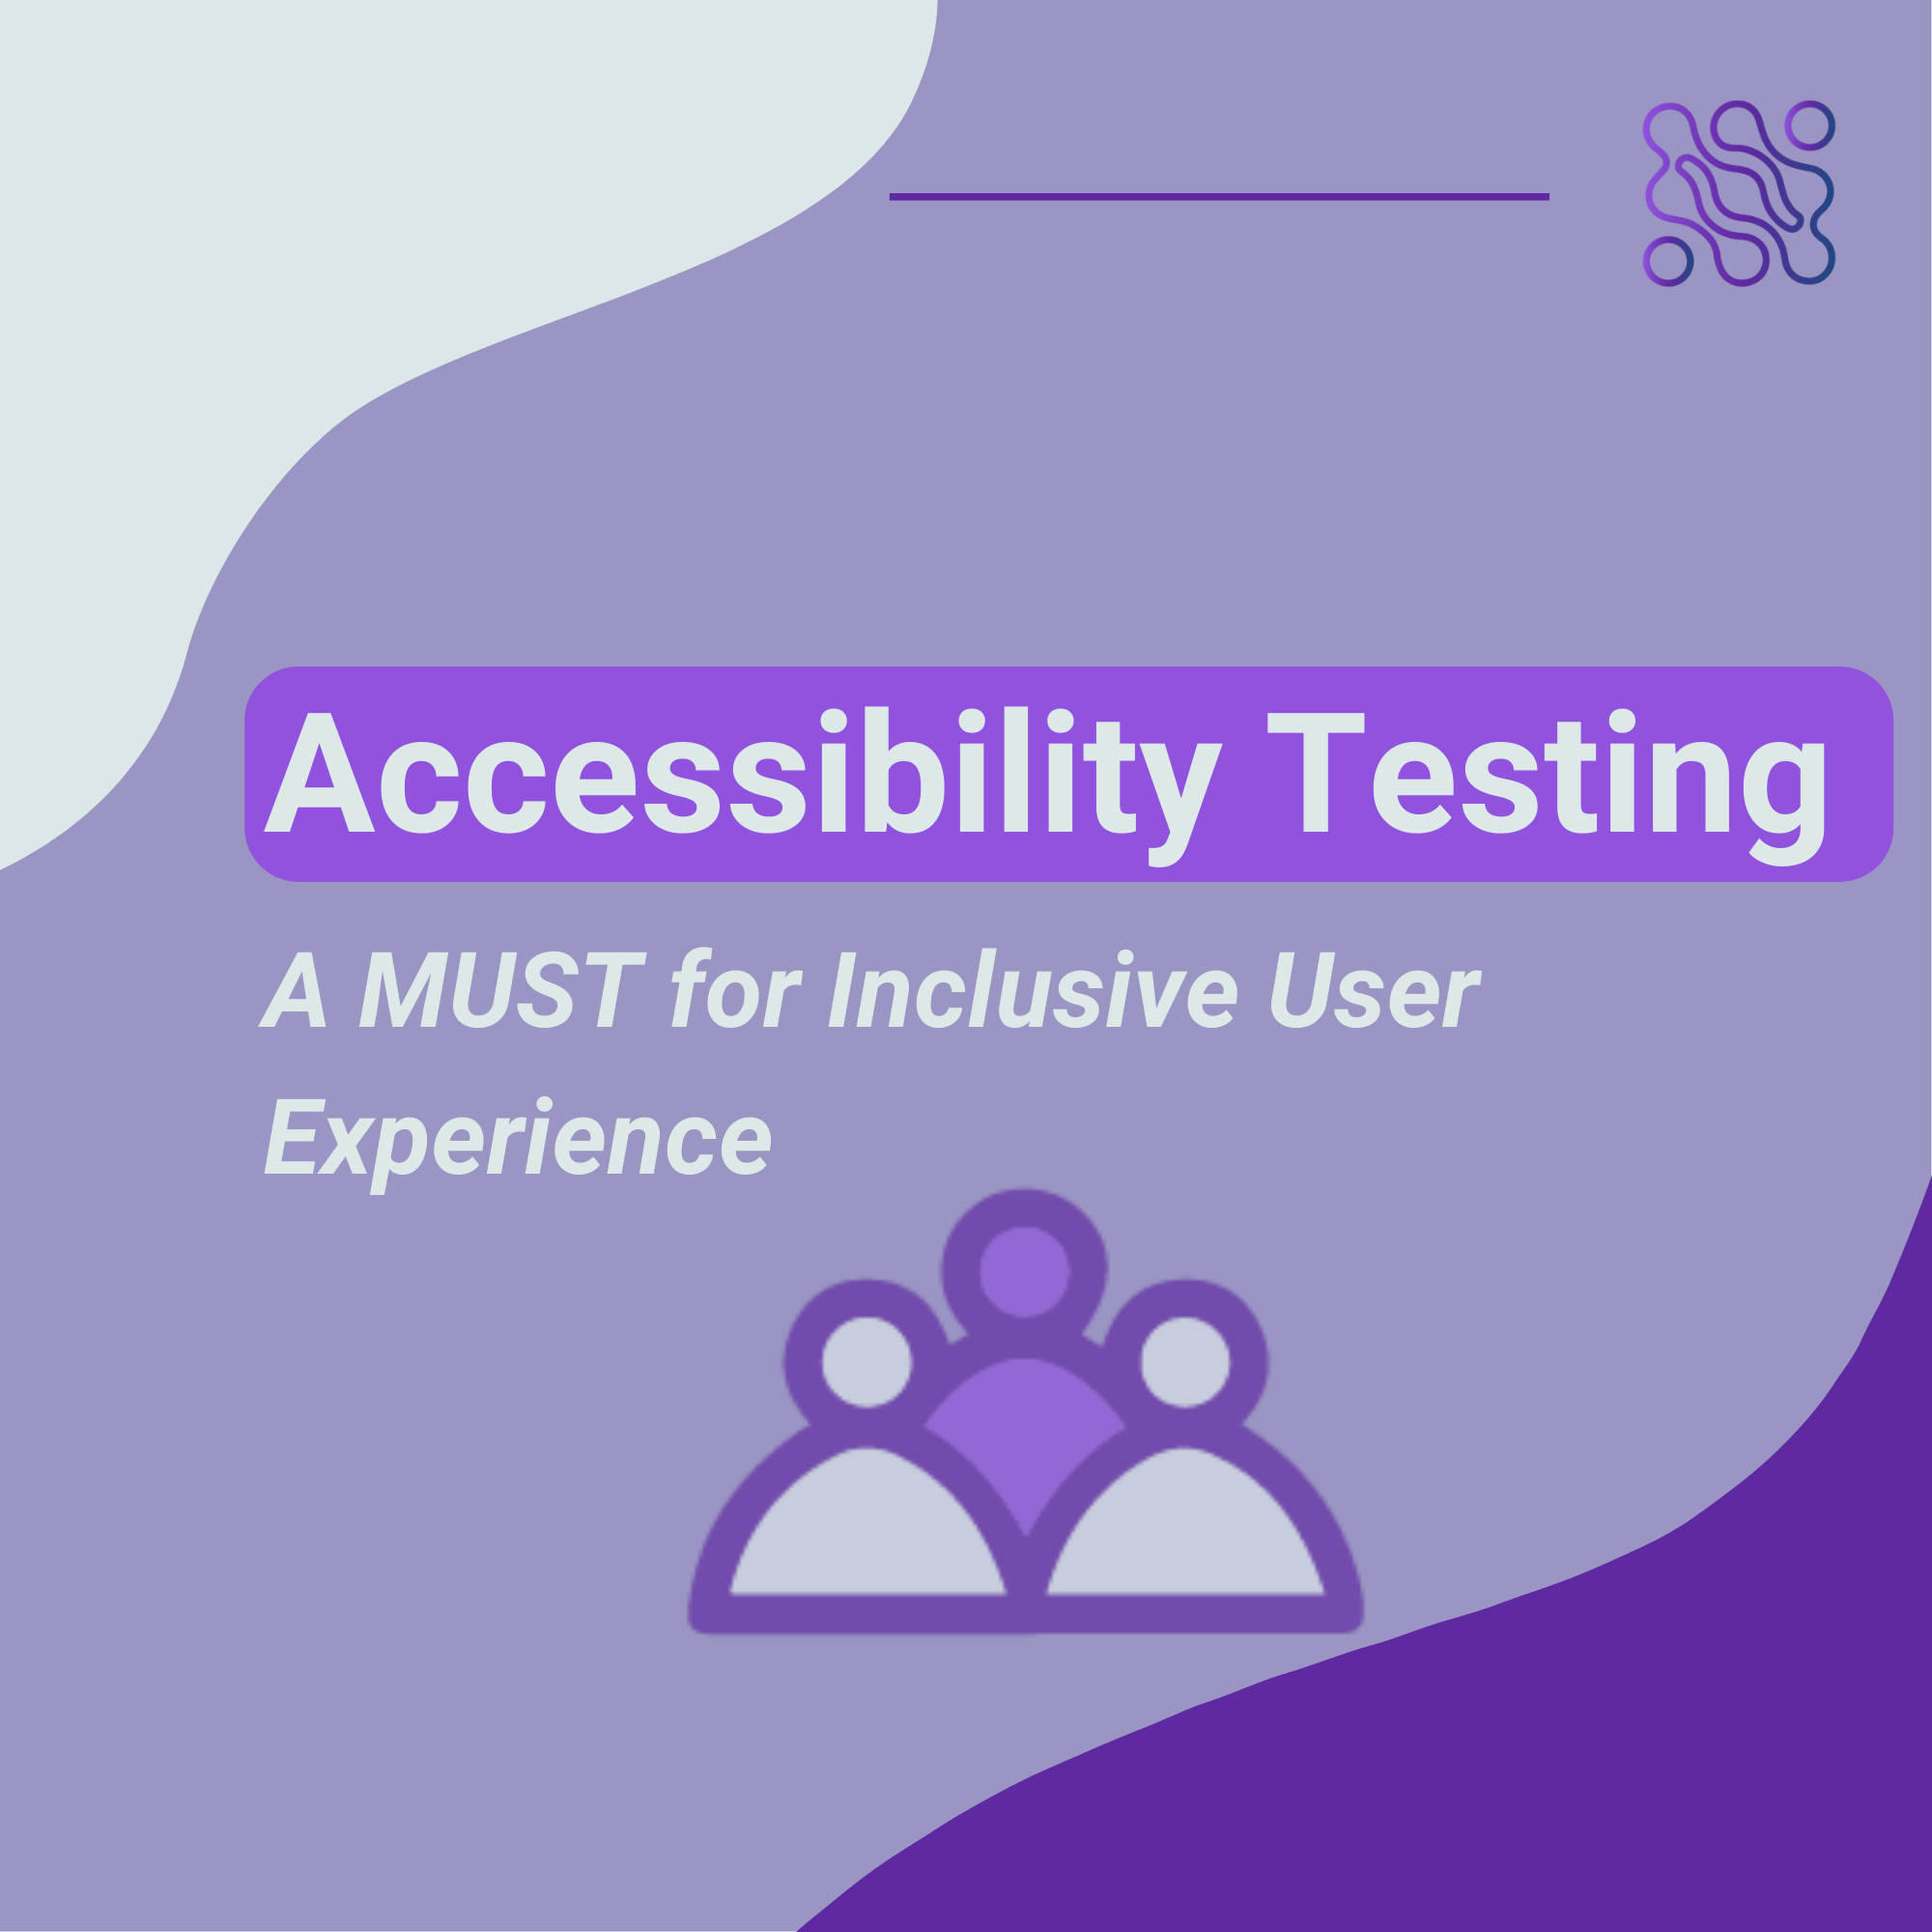 7 Reasons Why Accessibility Testing Is a Must for Inclusive User Experience